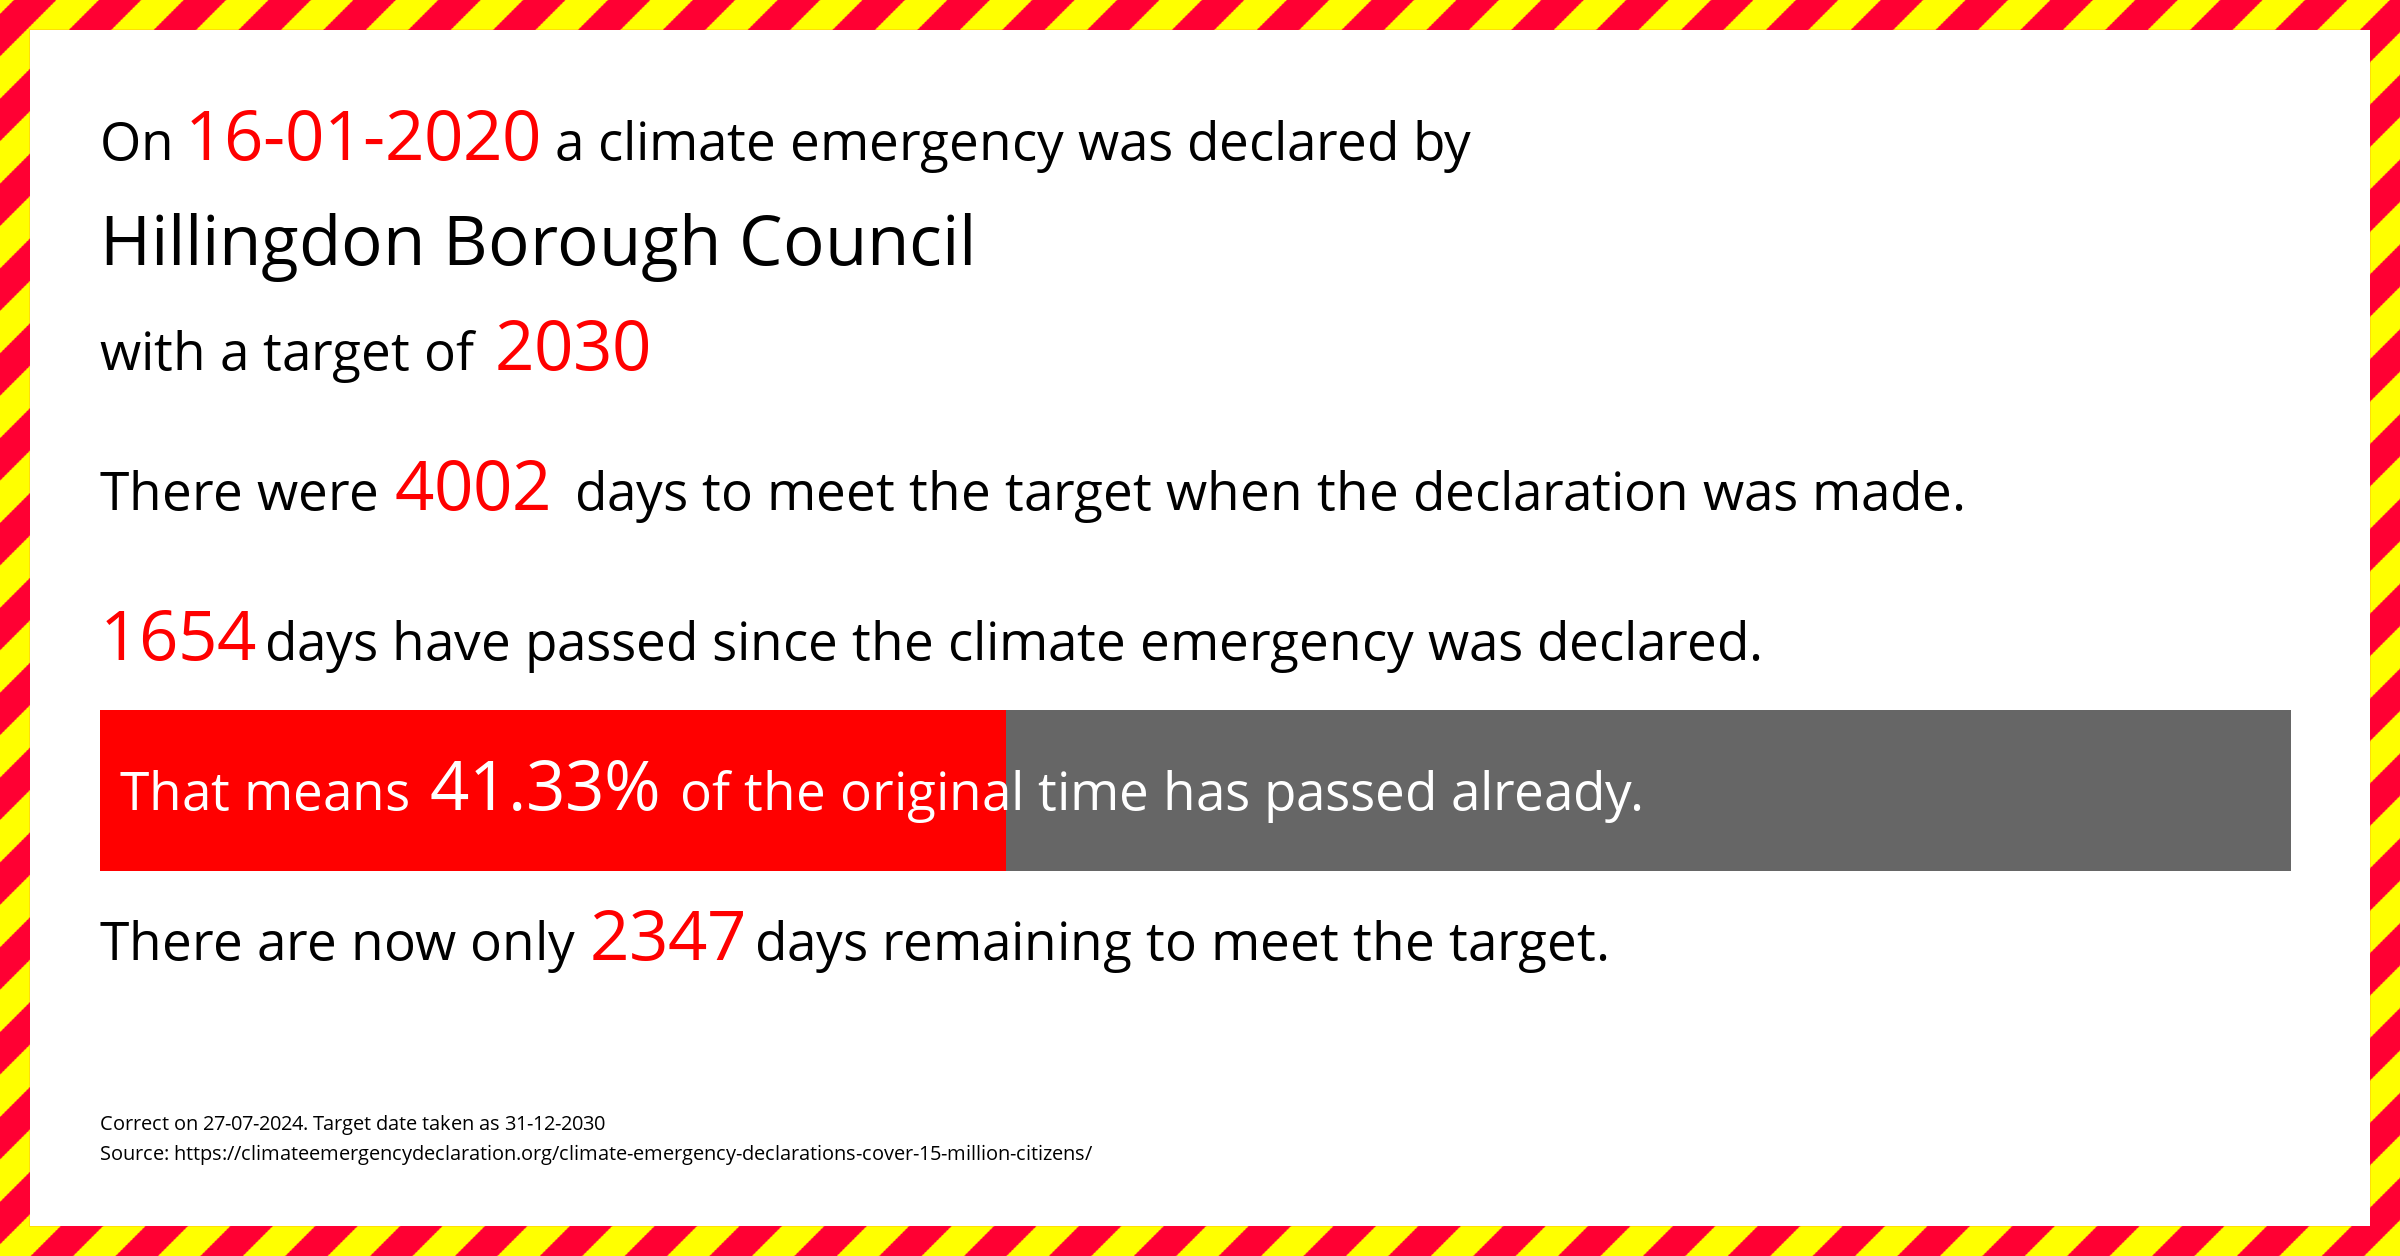 Hillingdon Borough Council declared a Climate emergency on Thursday 16th January 2020, with a target of 2030.